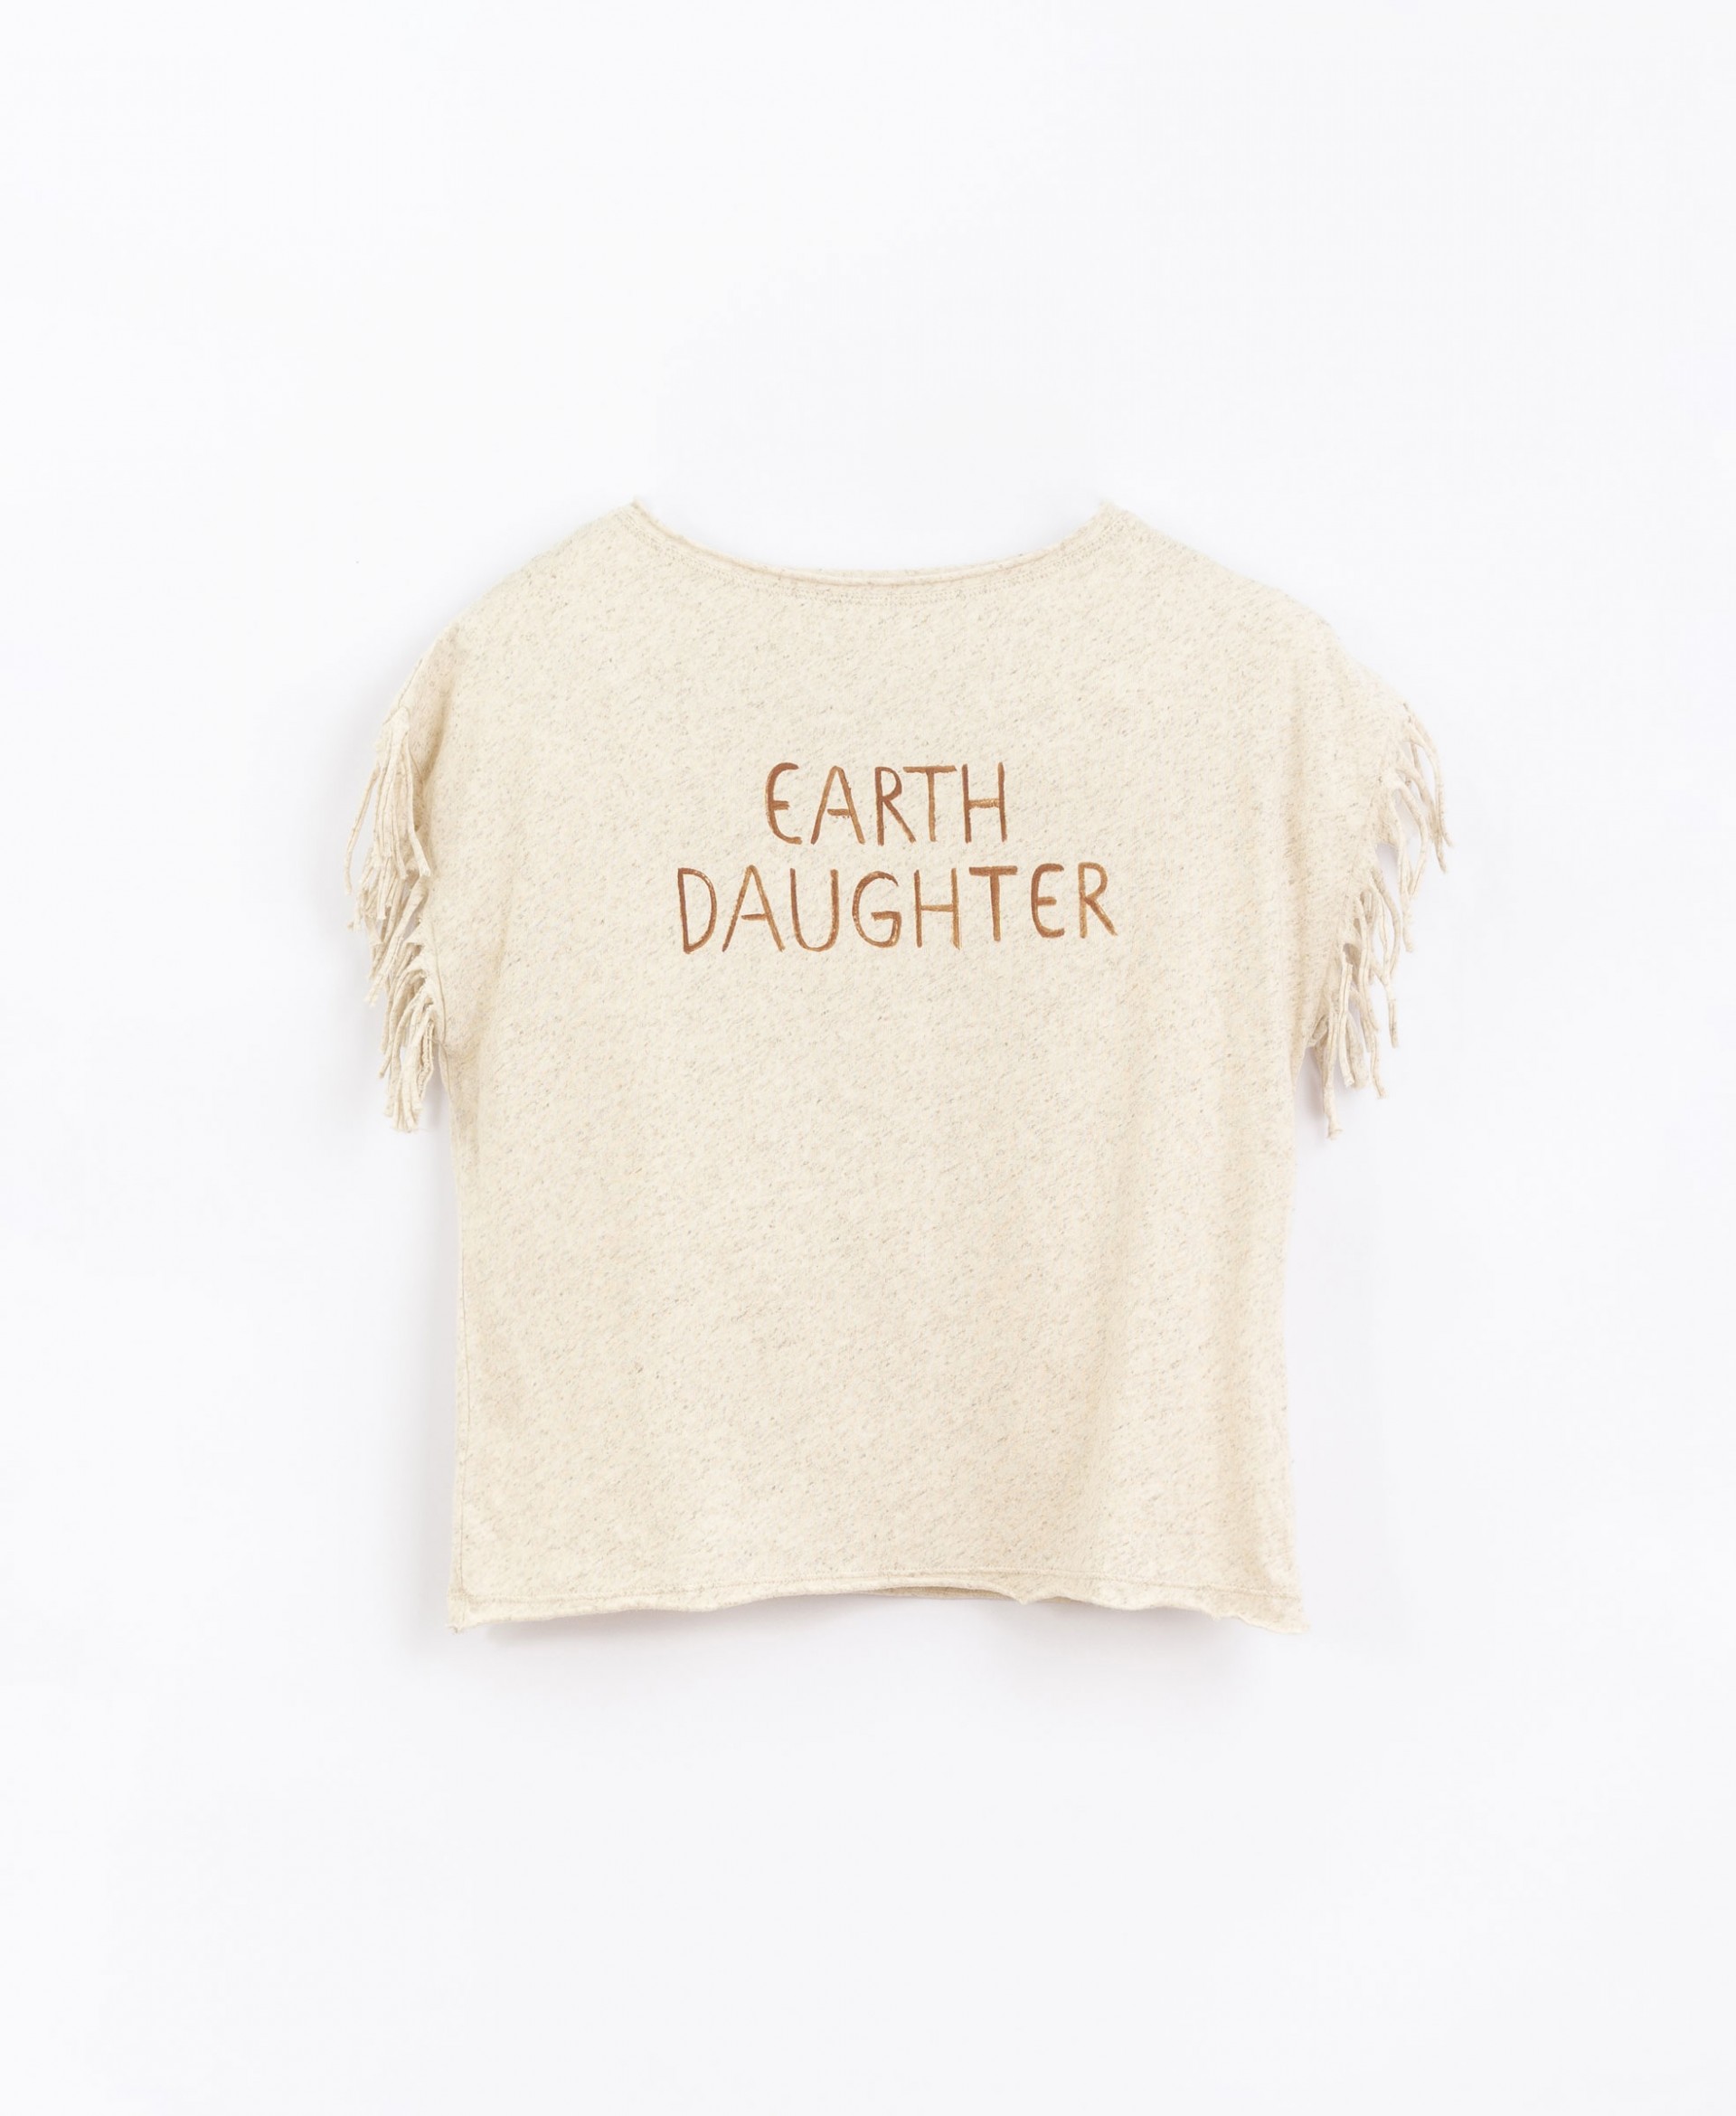 T-shirt in blend of organic cotton and hemp | Basketry